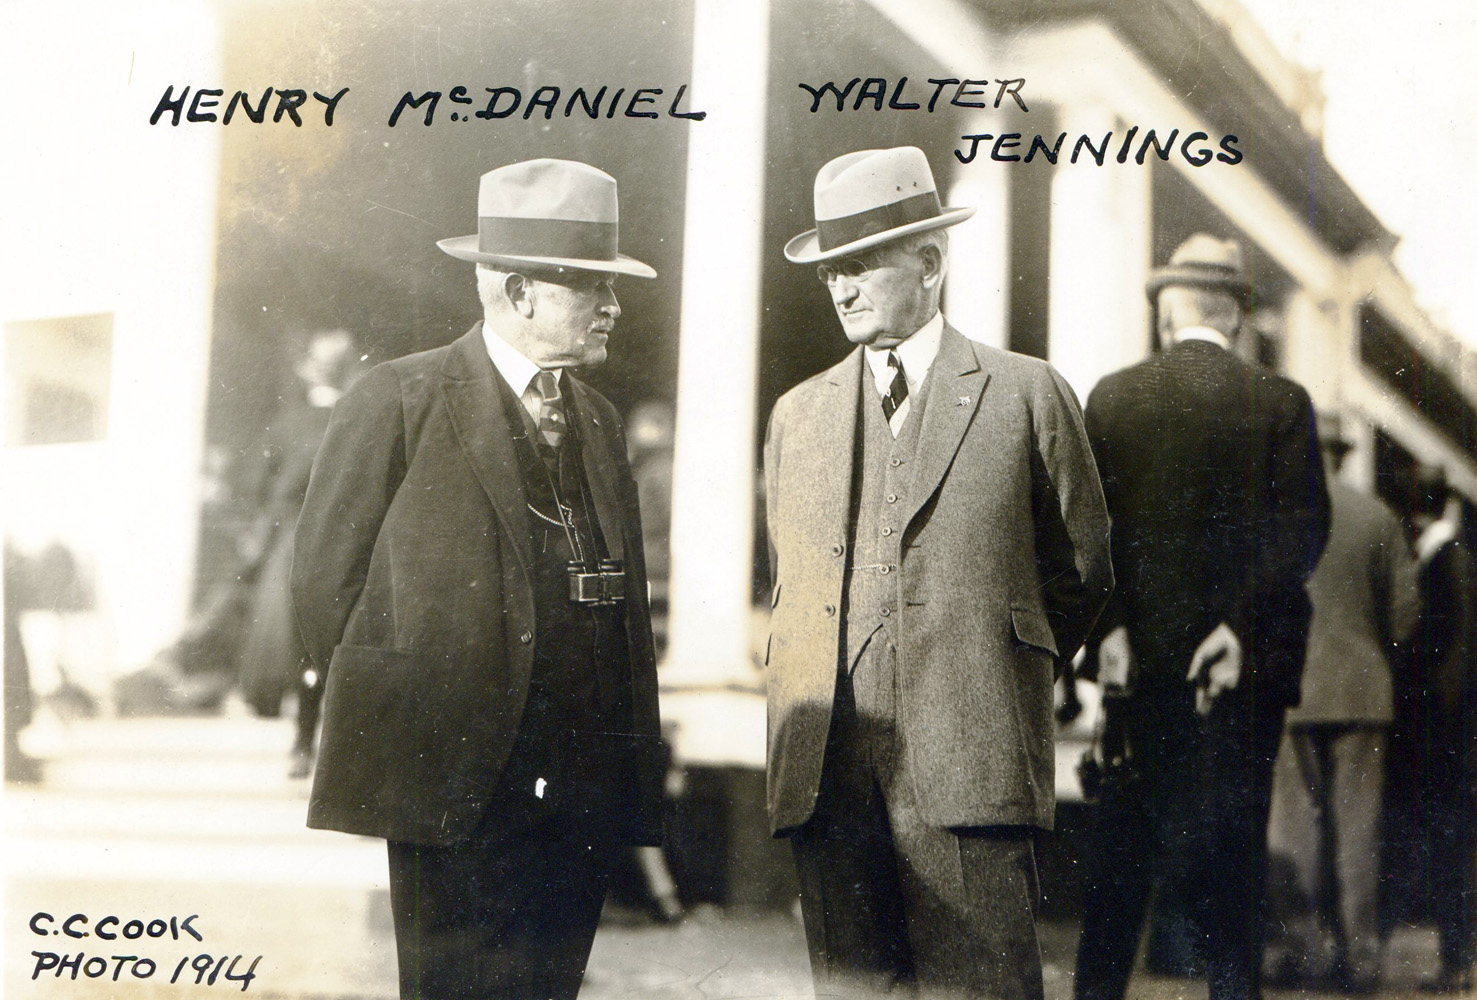 Henry McDaniel and Walter Jennings, 1914 (C. C. Cook/Museum Collection)